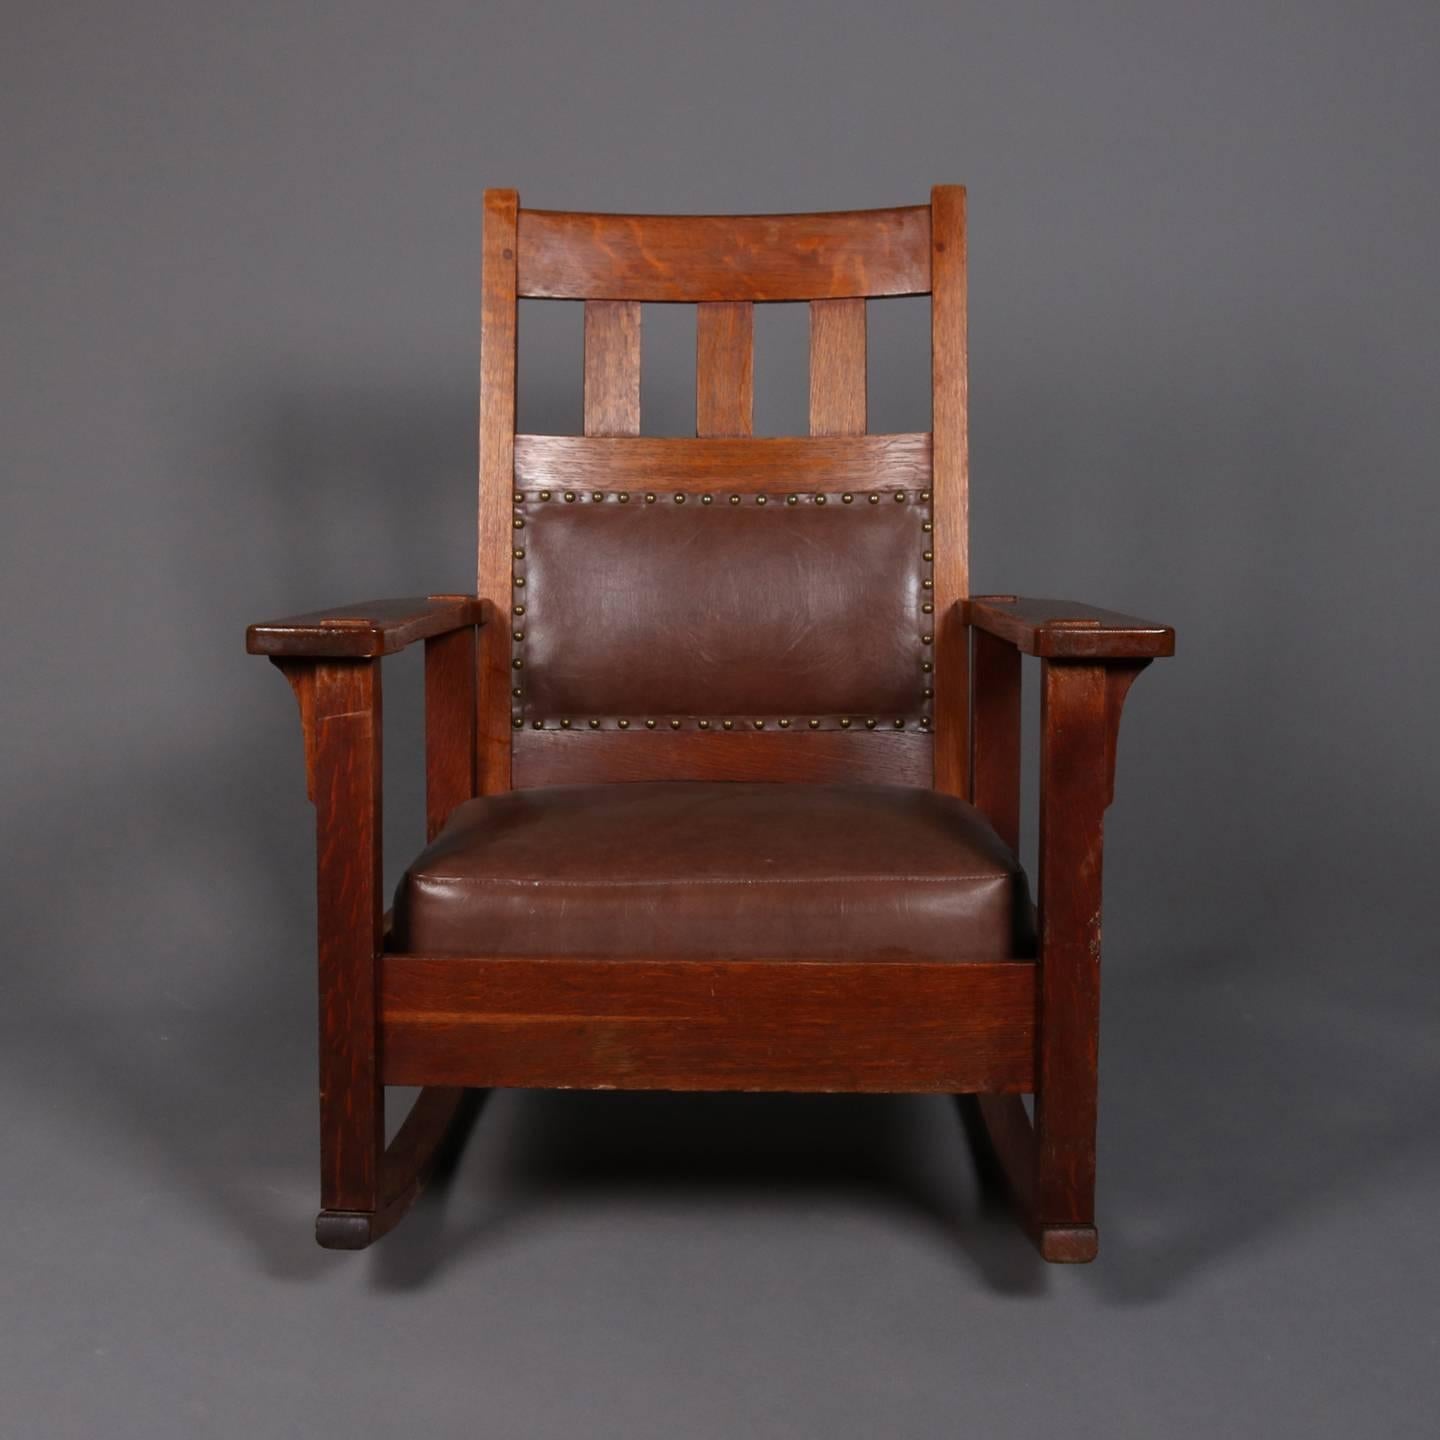 Antique Arts & Crafts Mission oak Stickley Brothers rocking chair features back with slat upper and upholstered lower and upholstered seat, signed Stickley Bros. on underside, circa 1910

Measures: 33